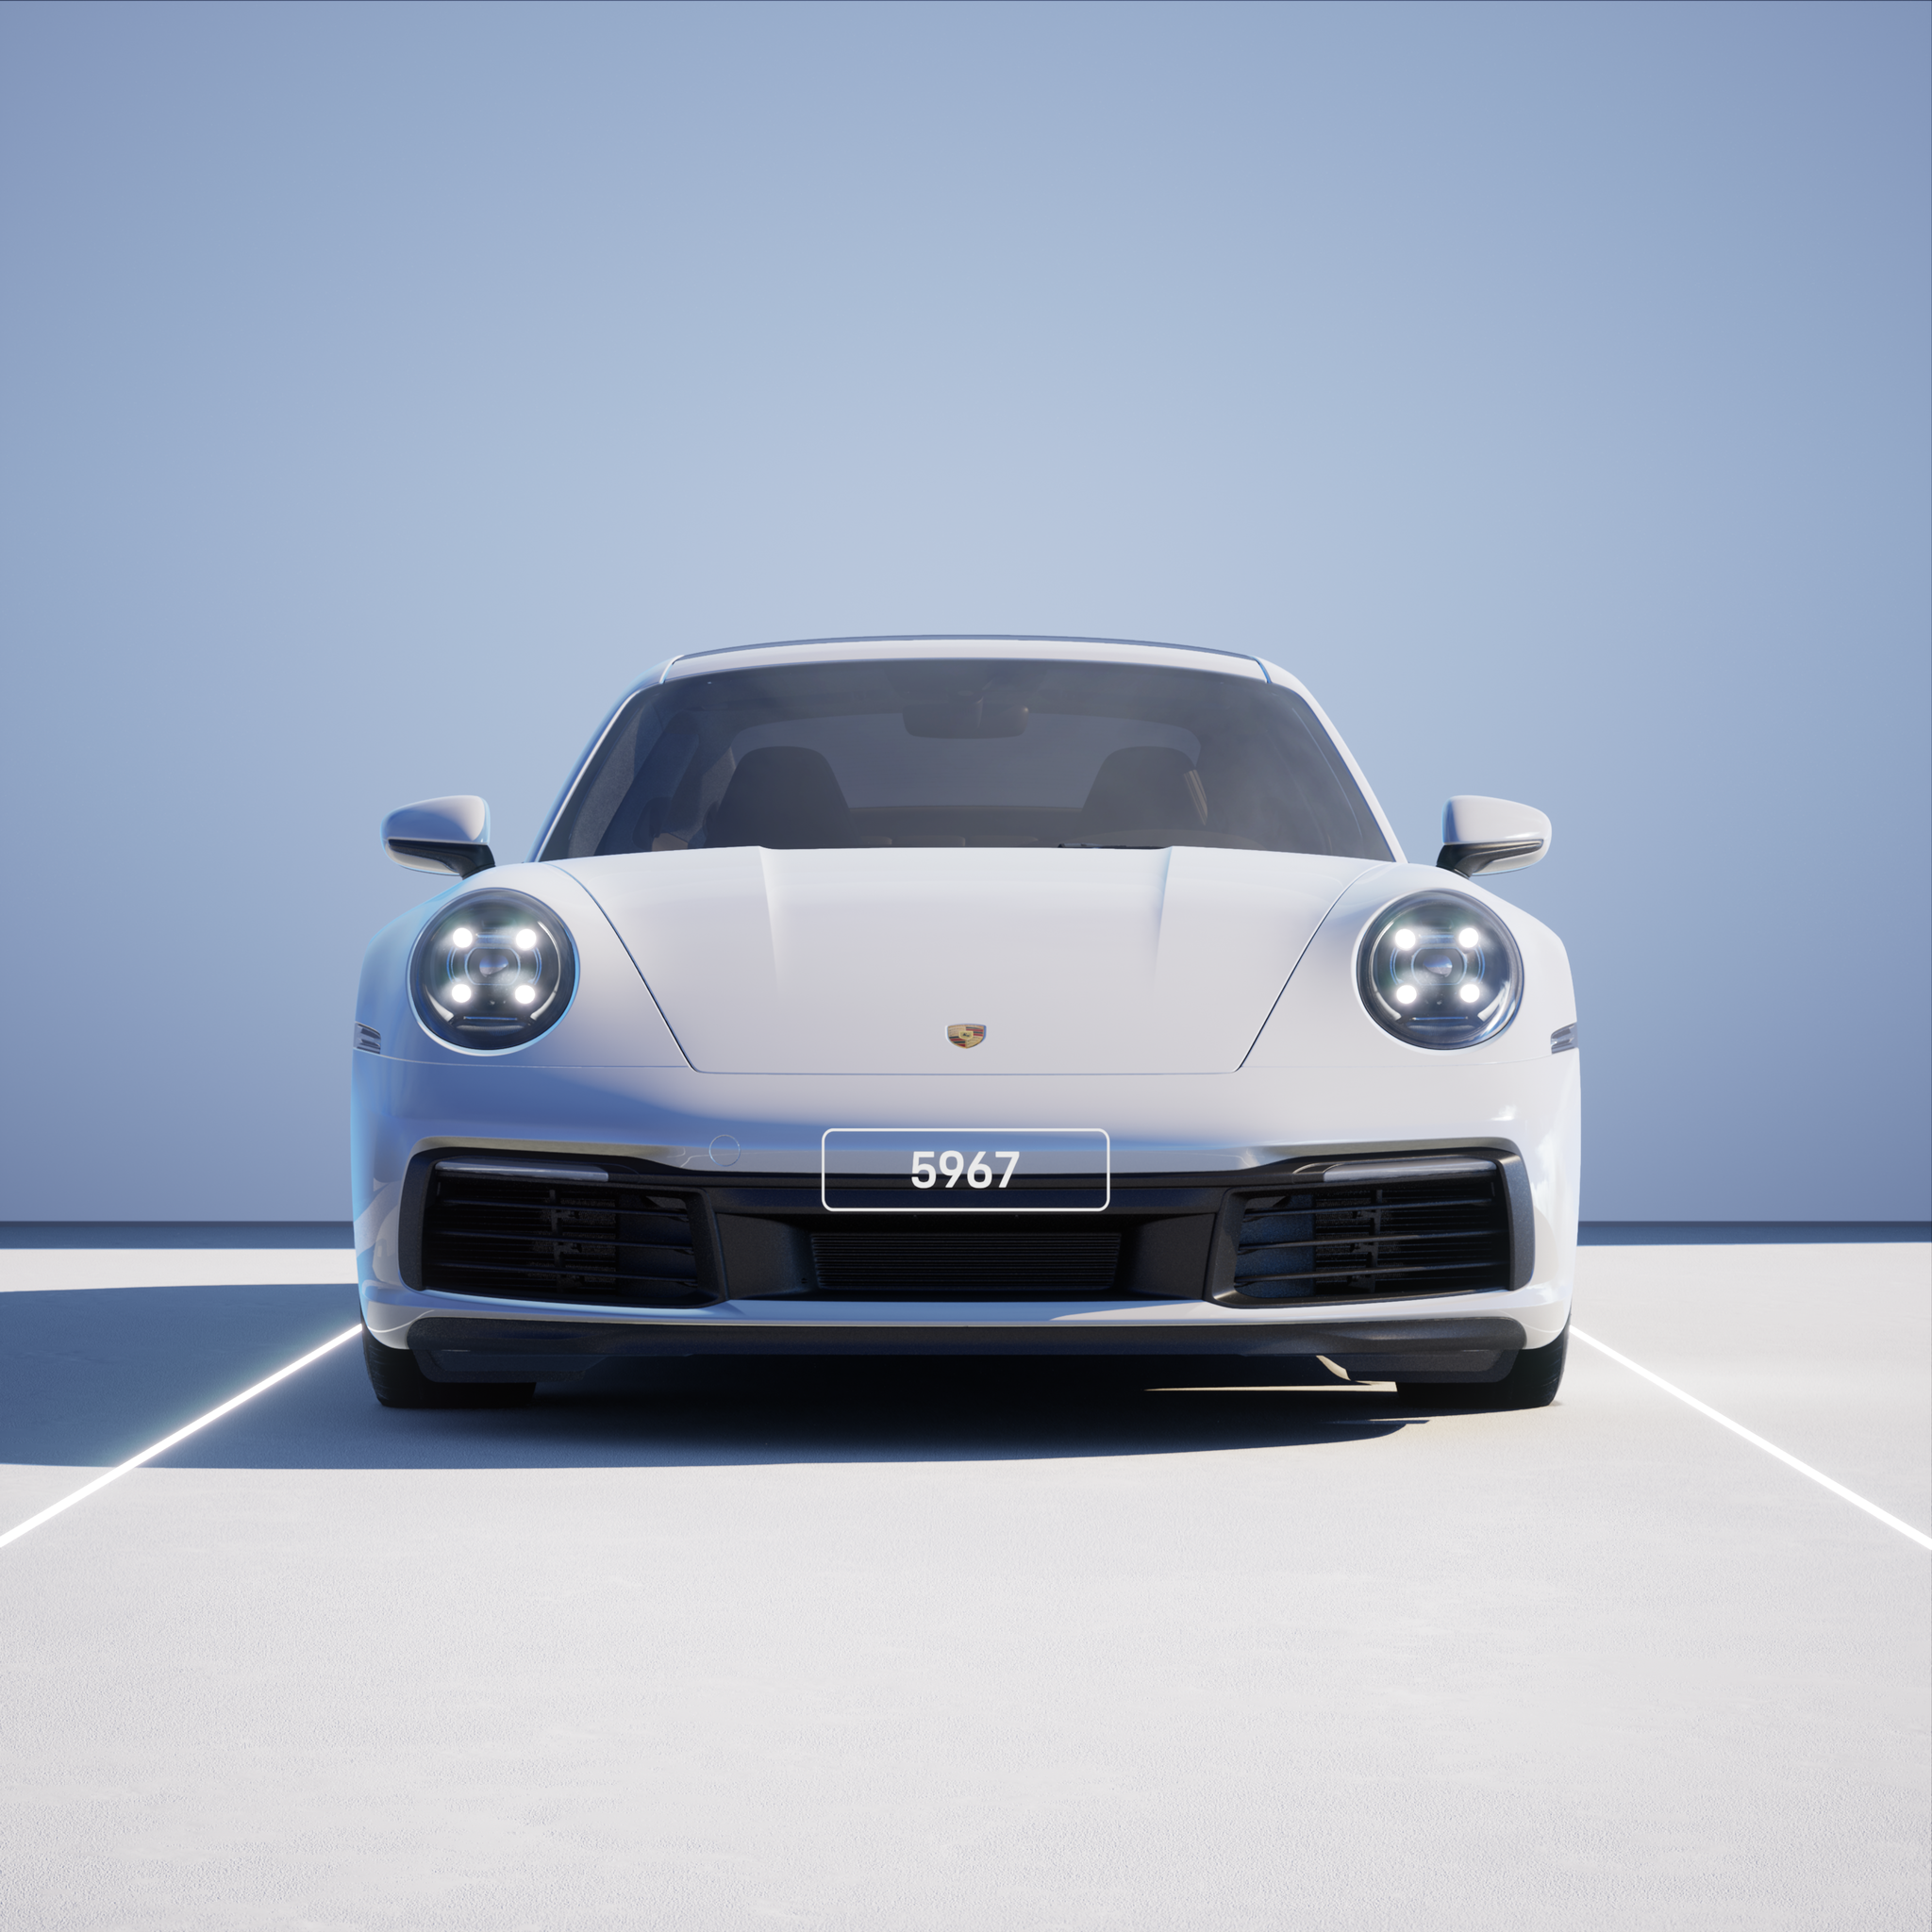 The PORSCHΞ 911 5967 image in phase